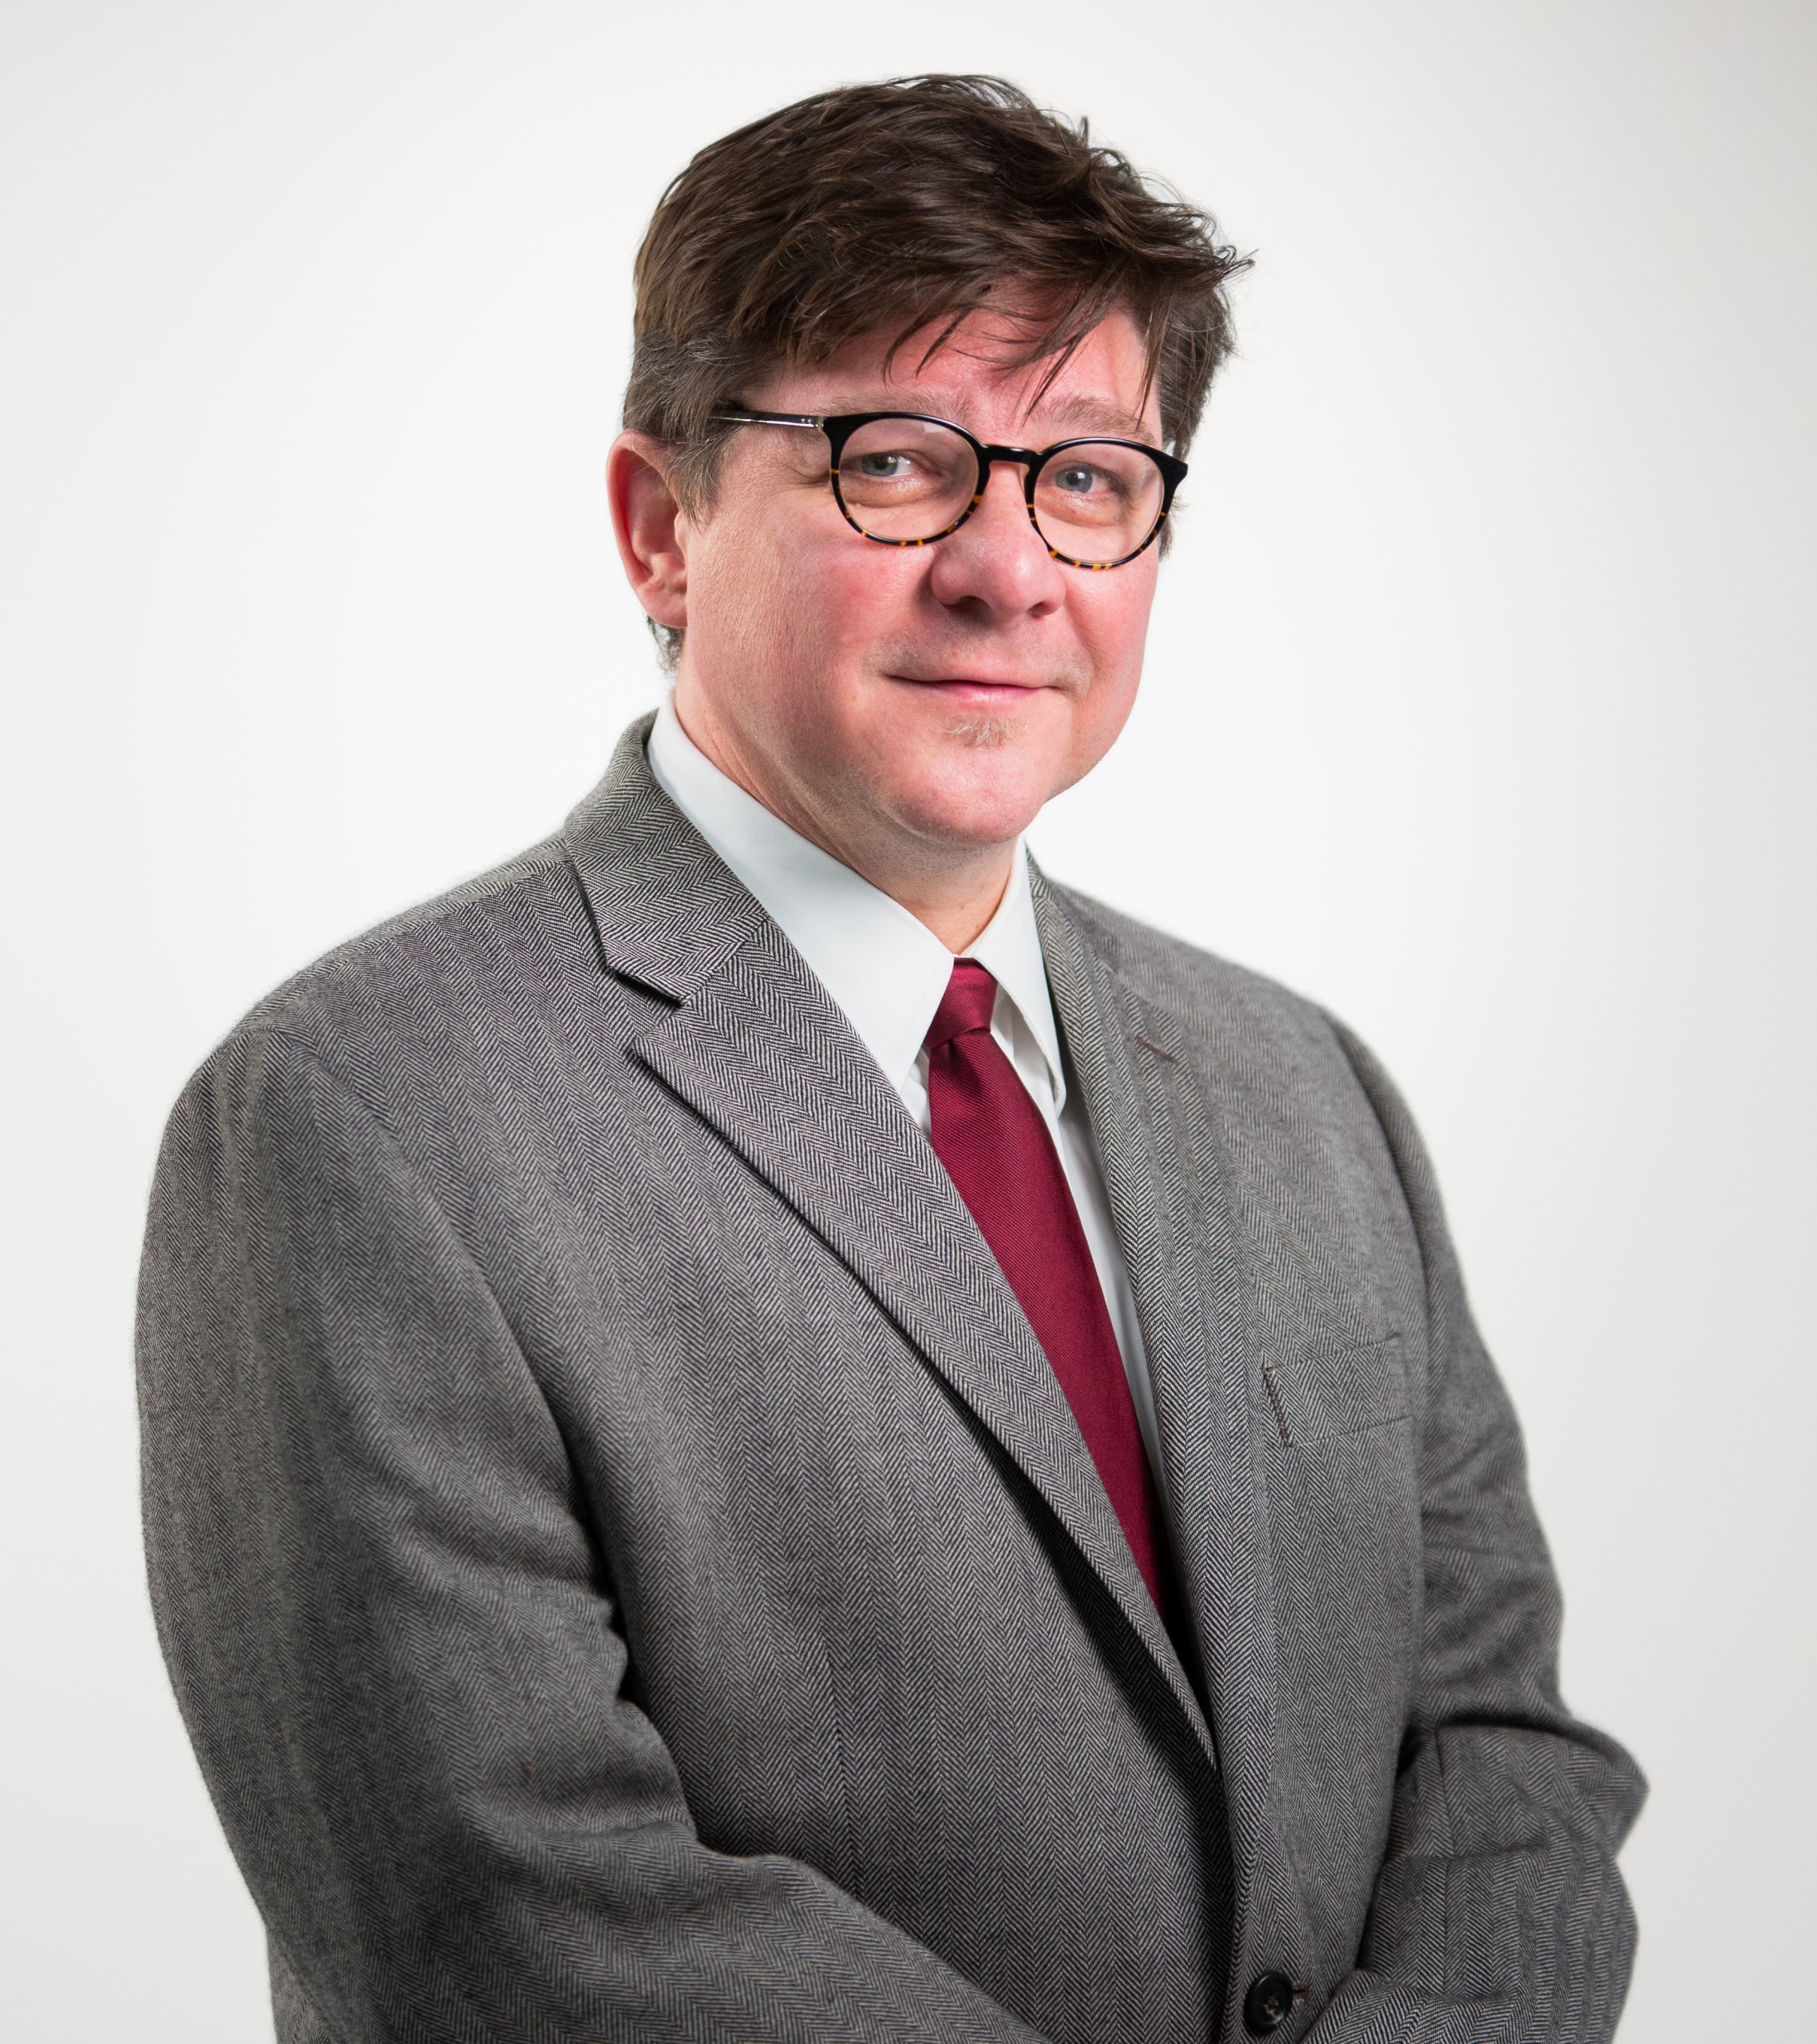 Male portrait of Board member Chris wearing grey suit and red tie